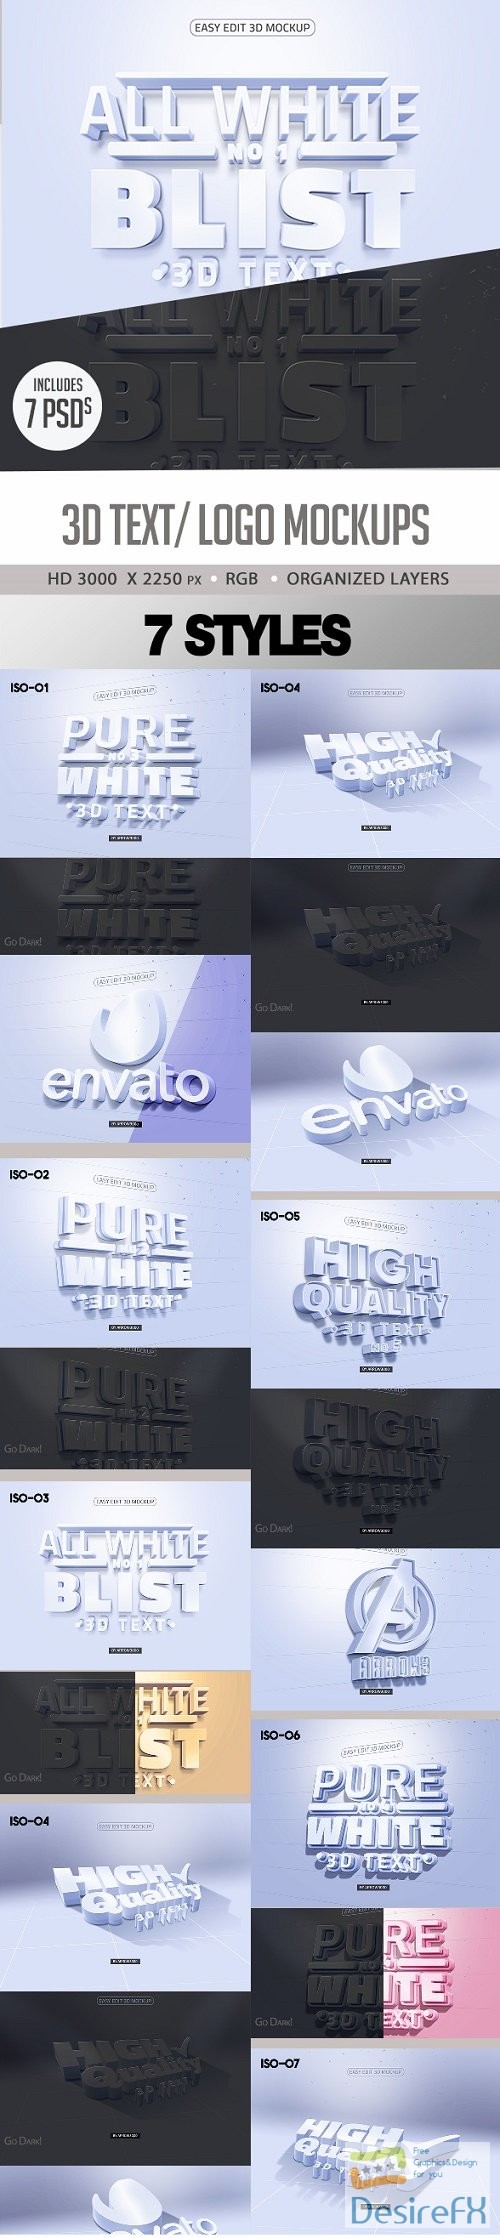 Pure White 3D Text/ Logo Mock up - 23888803